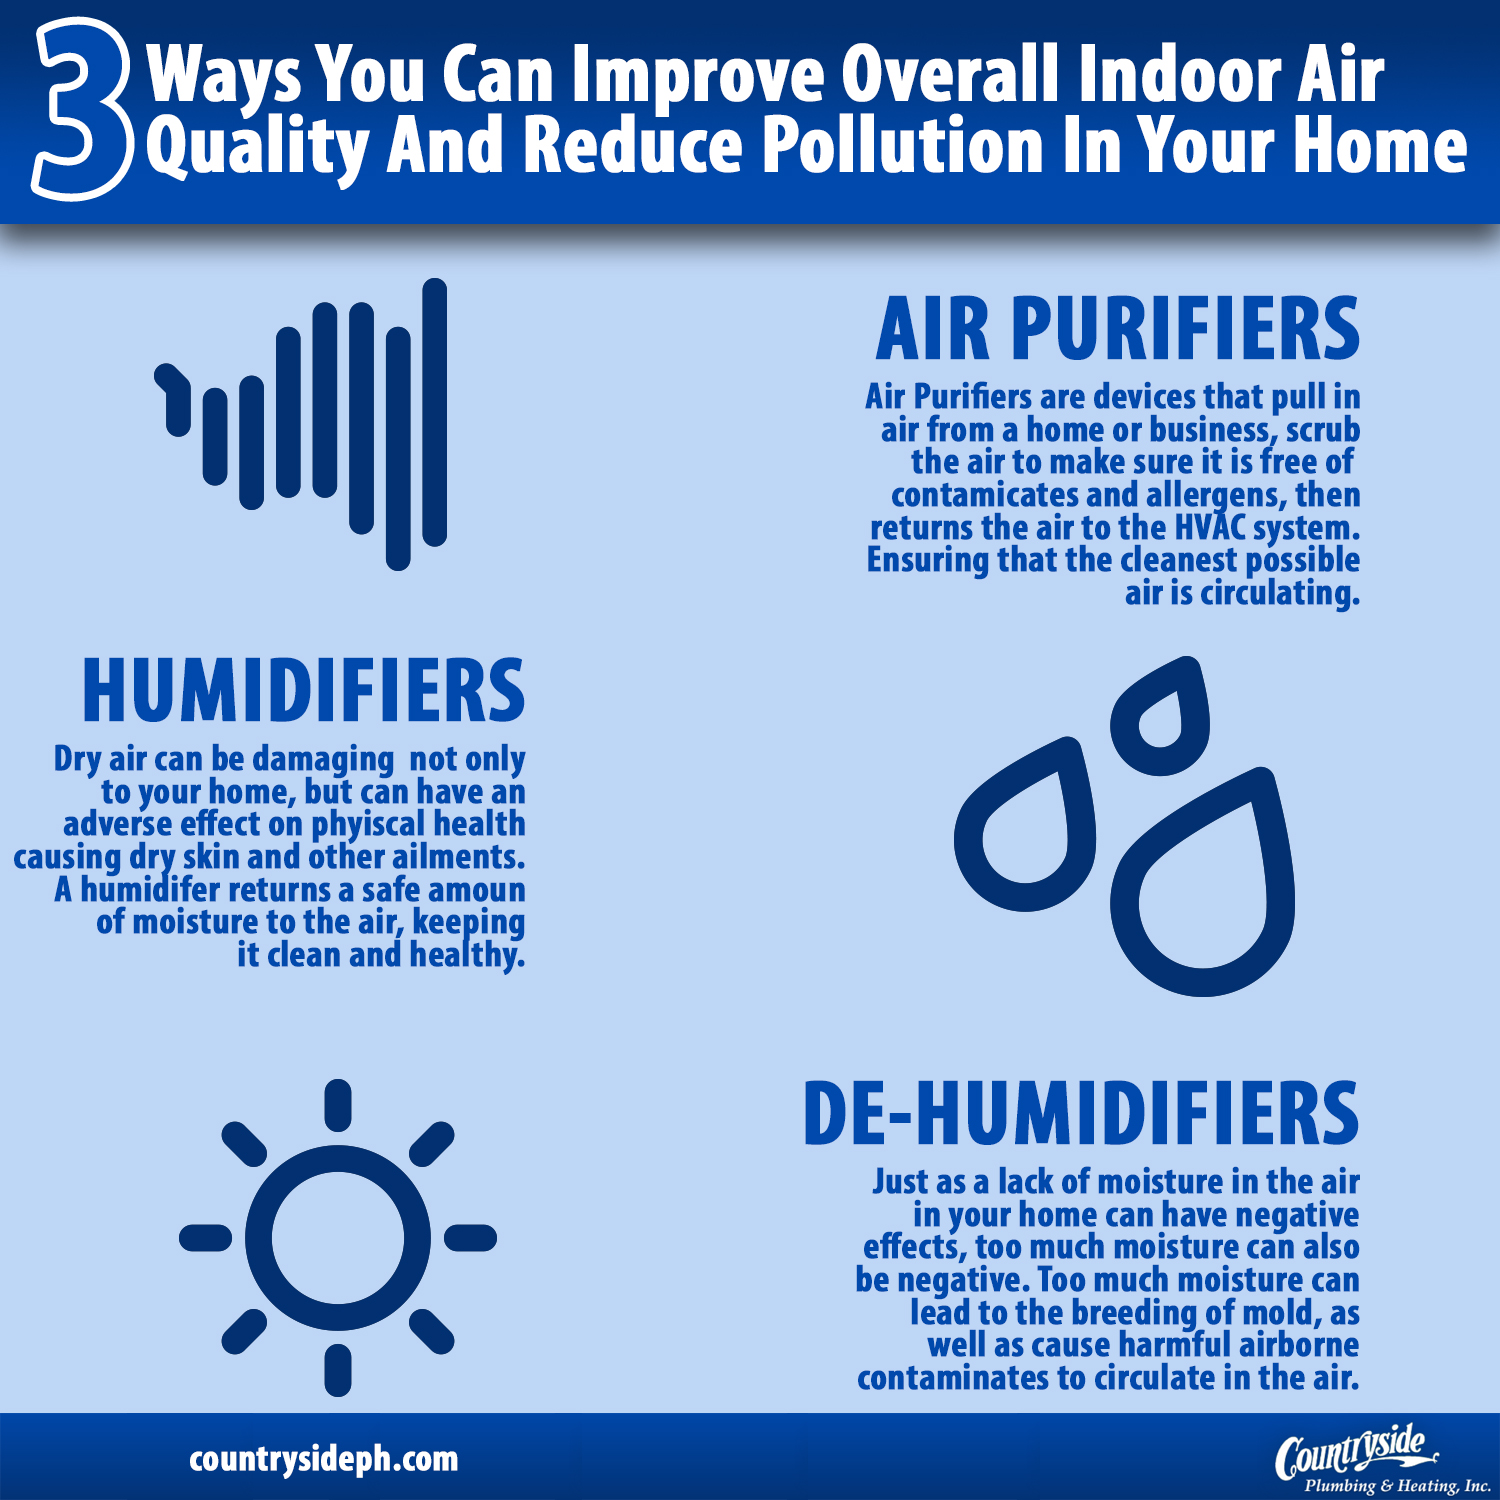 Improving Indoor Air Quality through HVAC Systems